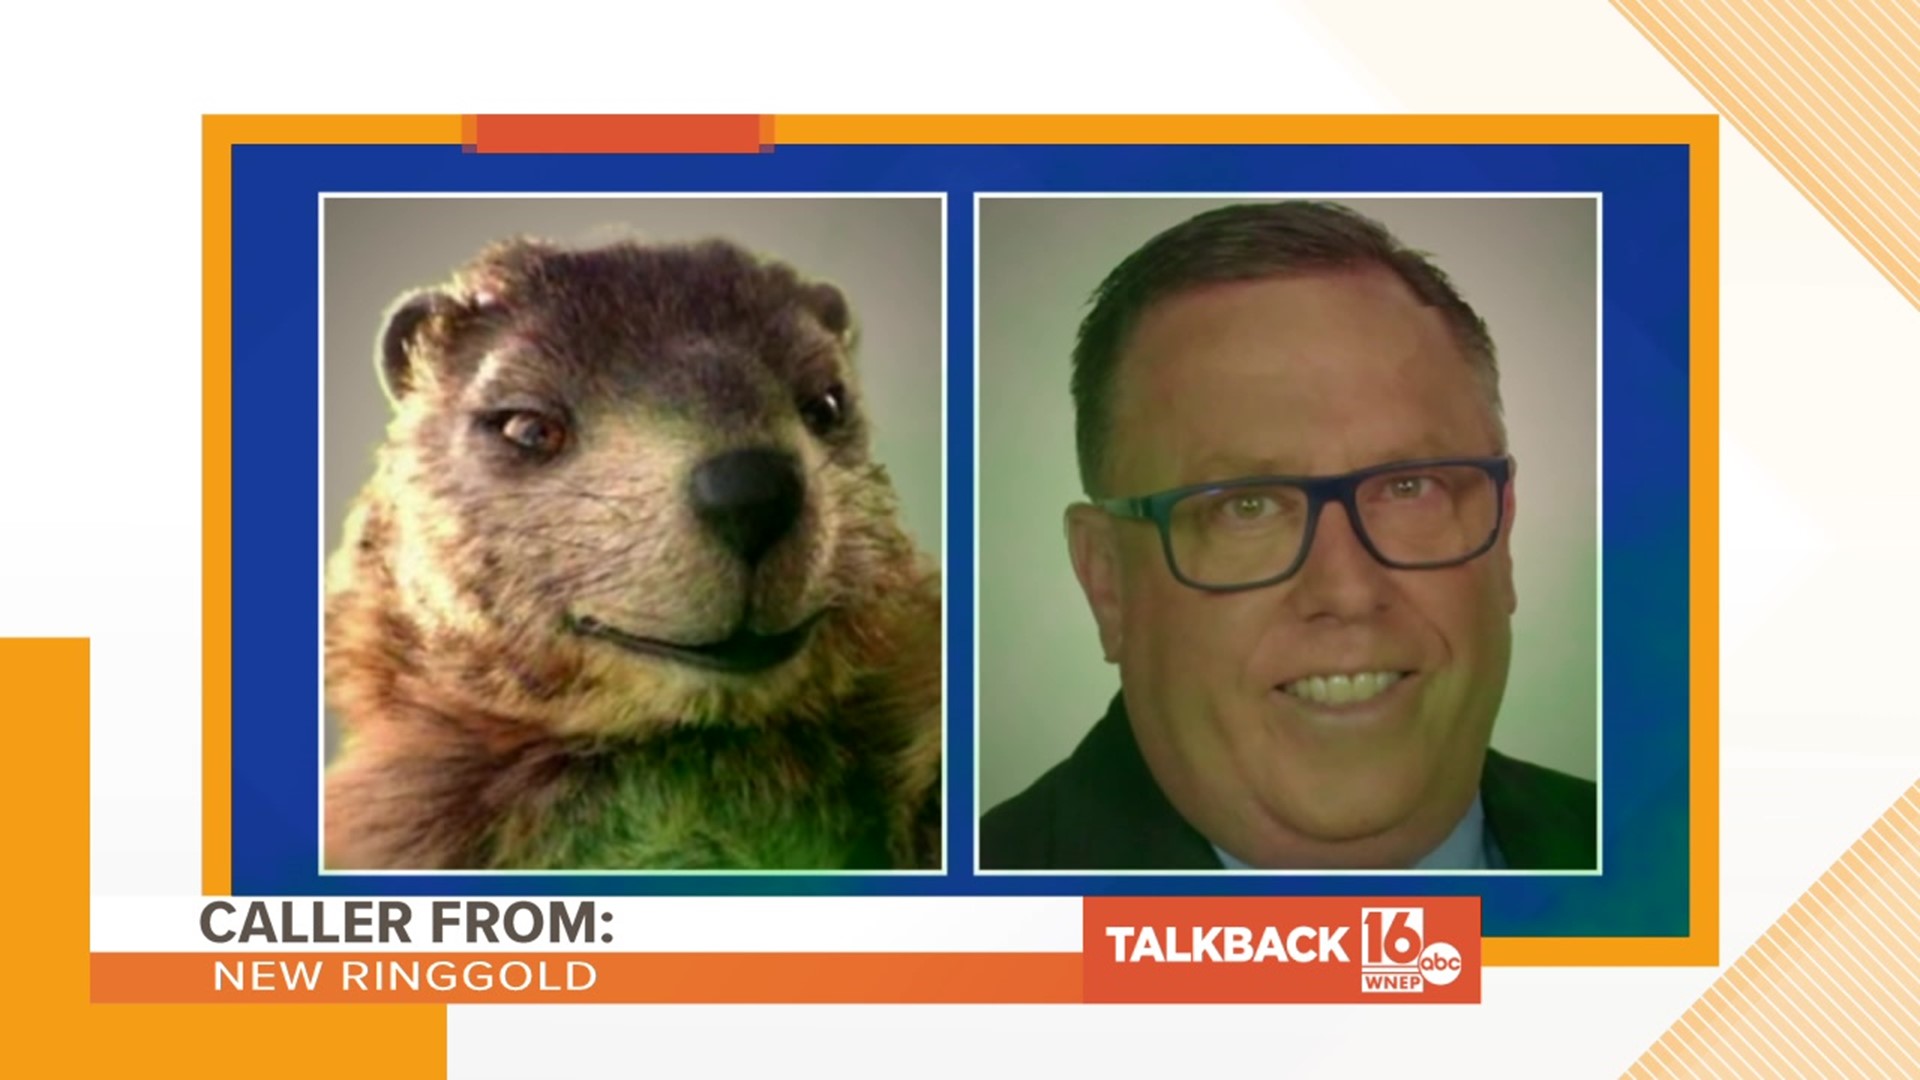 Some are wondering if a WNEP look-a-like made the trip to Punxsutawney.